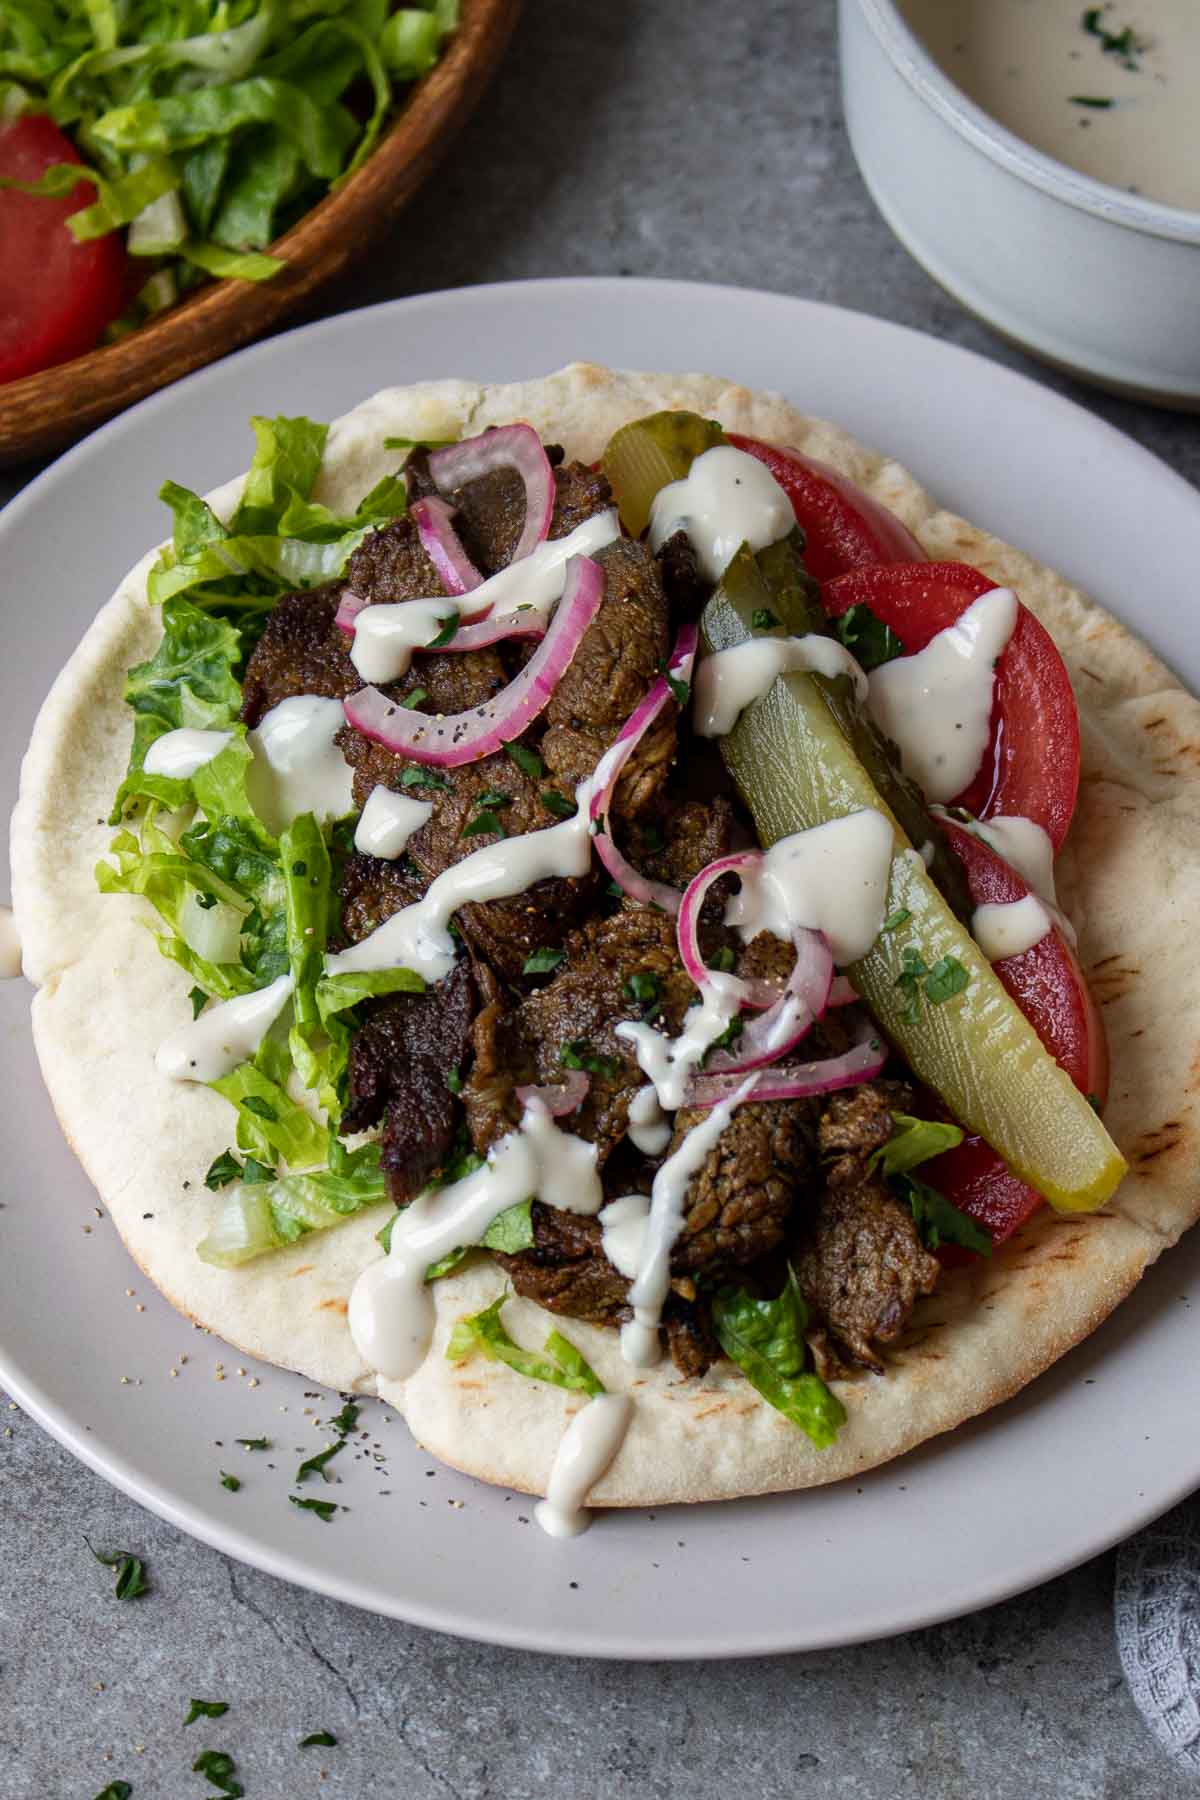 Plate with a pita layered with beef shawarma, shredded lettuce, slices of tomato, pickled red onion, pickle slices, and a drizzle of tahini sauce on top.